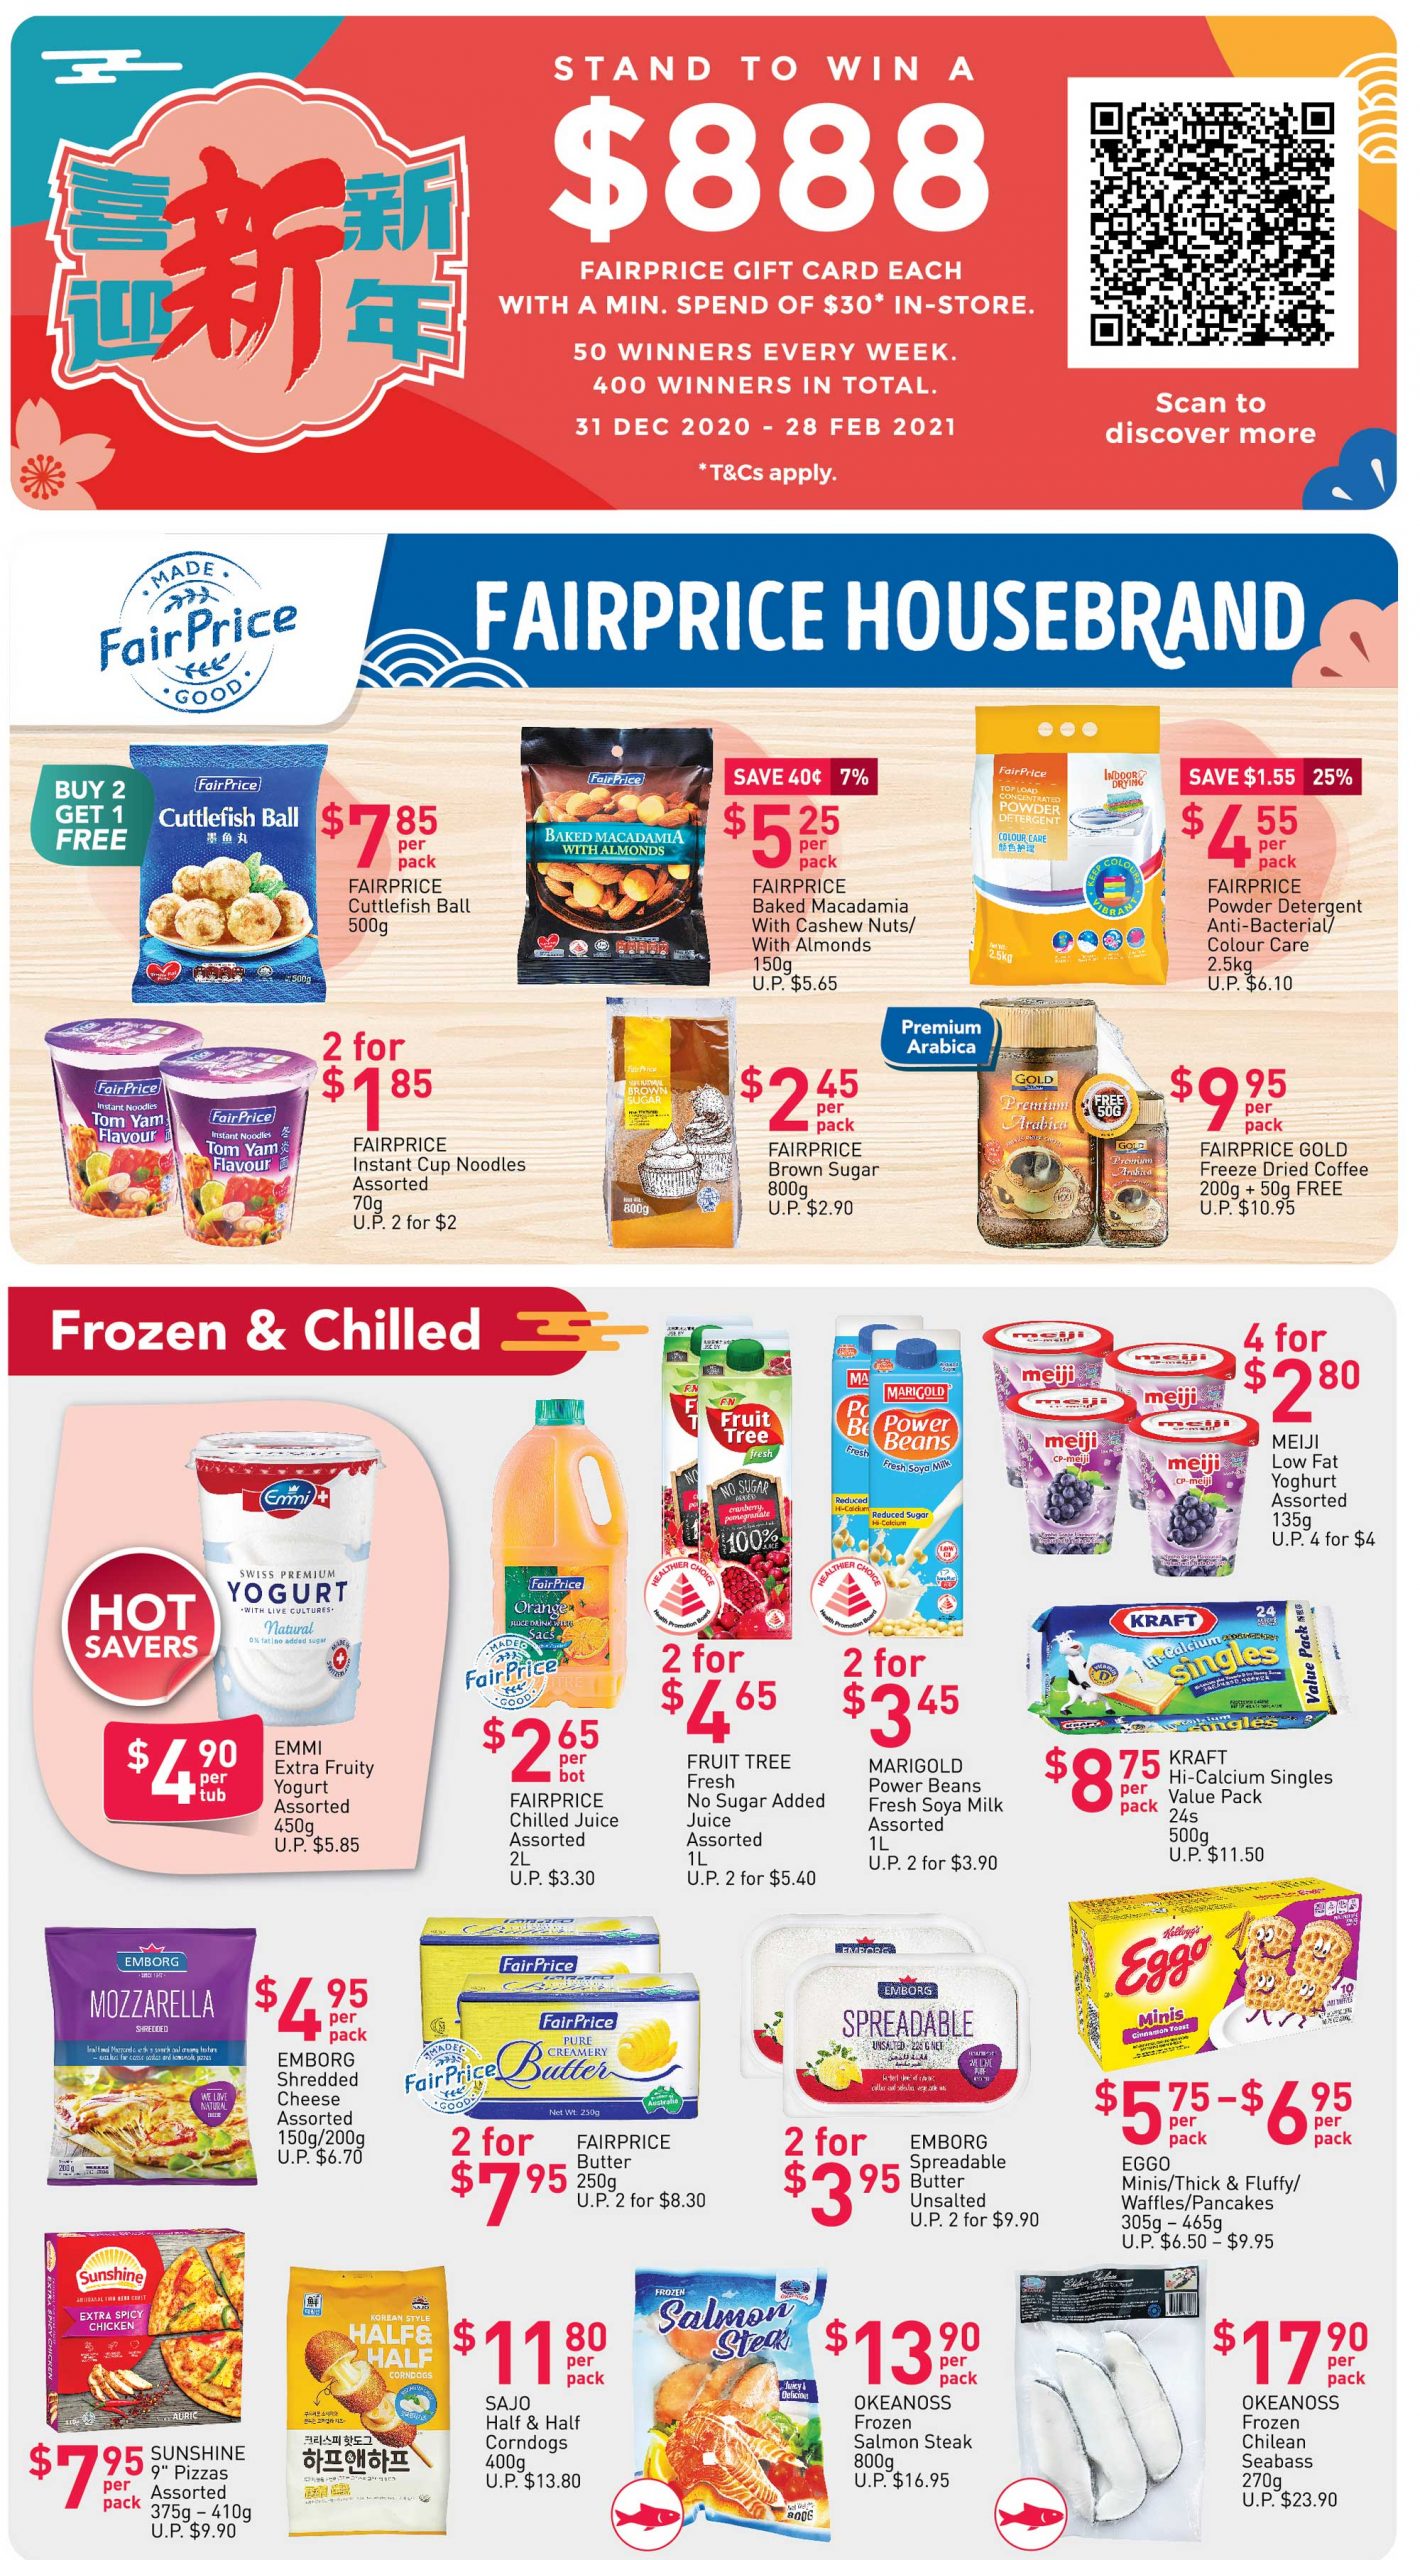 FairPrice’s weekly saver deals till 3 March 2021 (1)